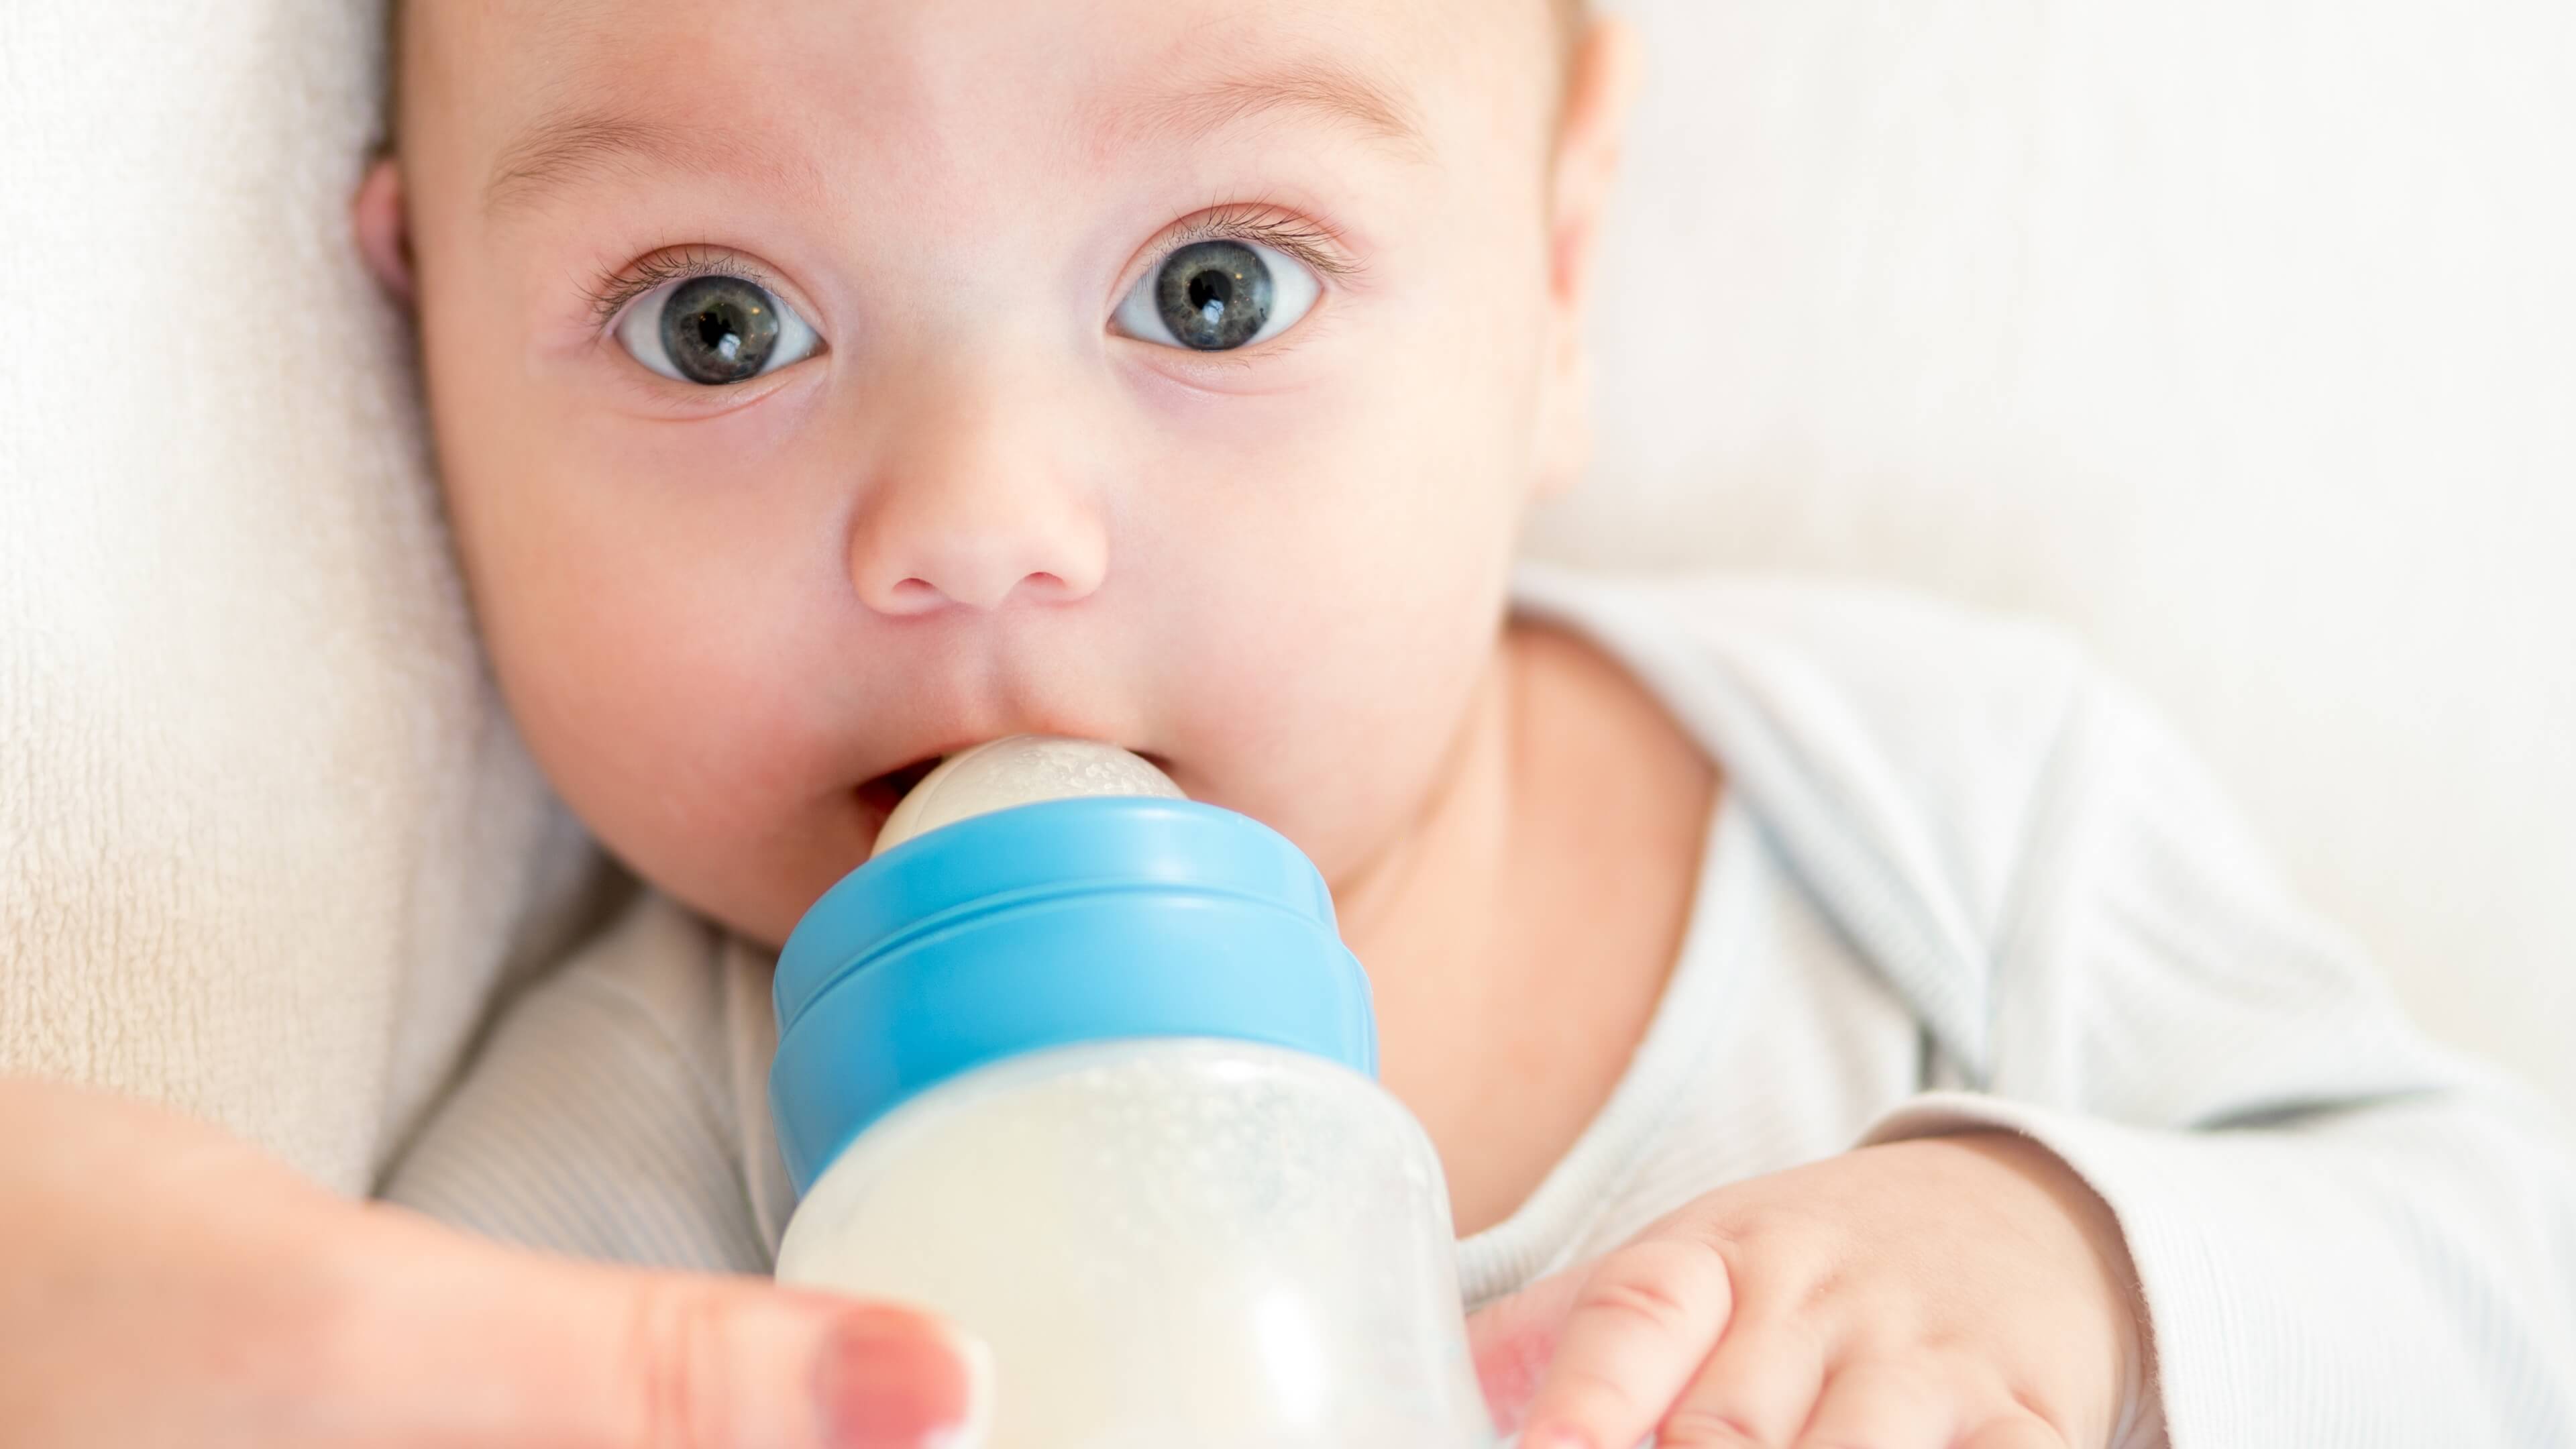 the best formula for breastfed babies